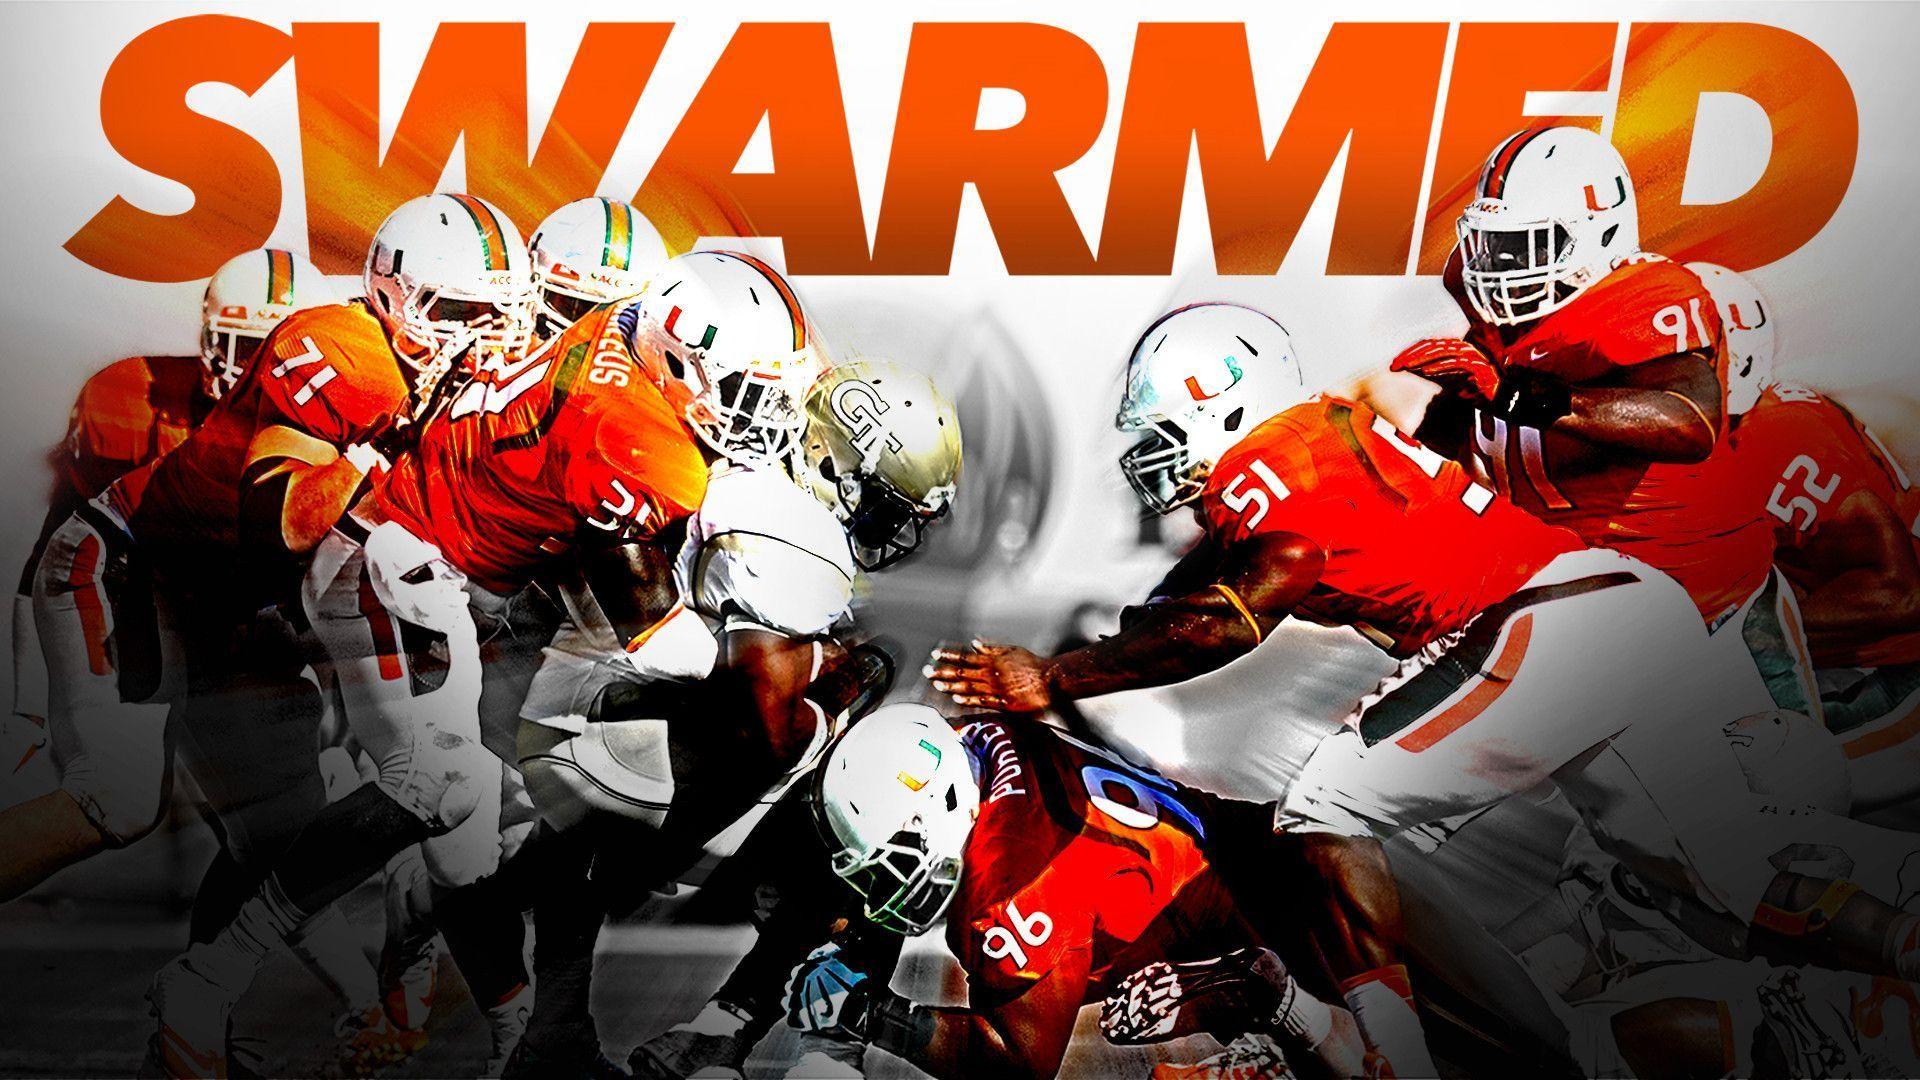 2013 14 Wallpaper Of Miami Hurricanes Official